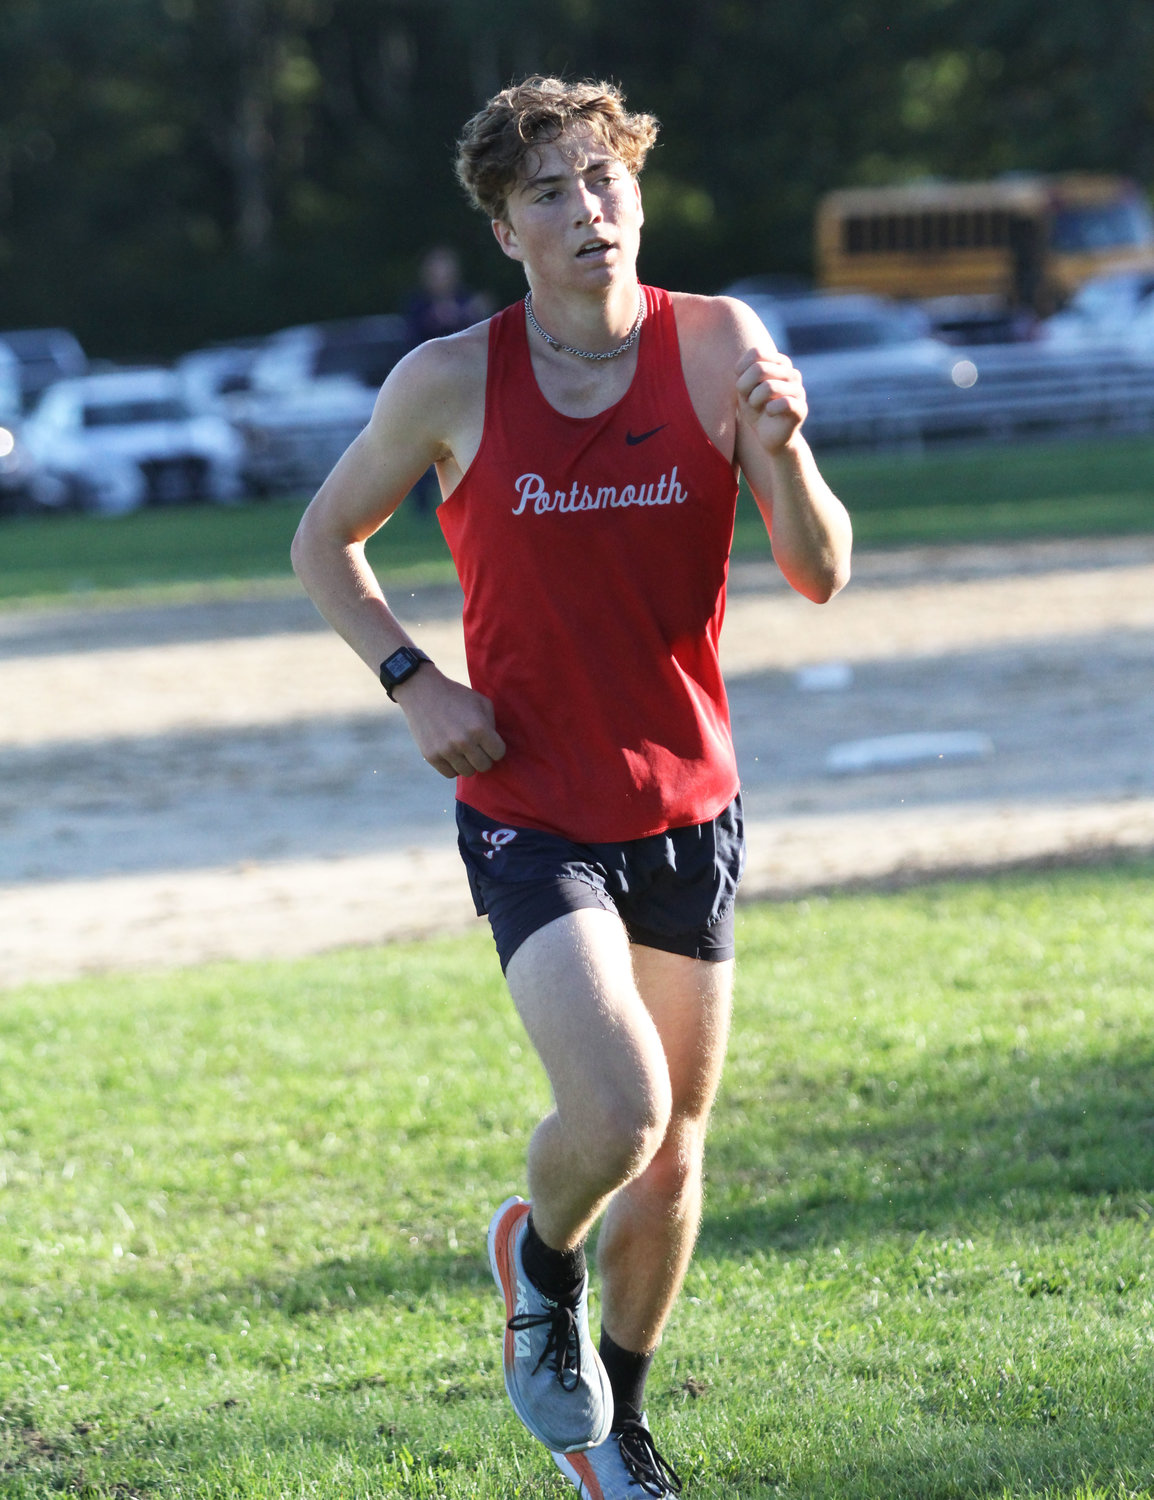 Portsmouth’s lead runner was Wake Zani, who ran seventh overall in 18:58.